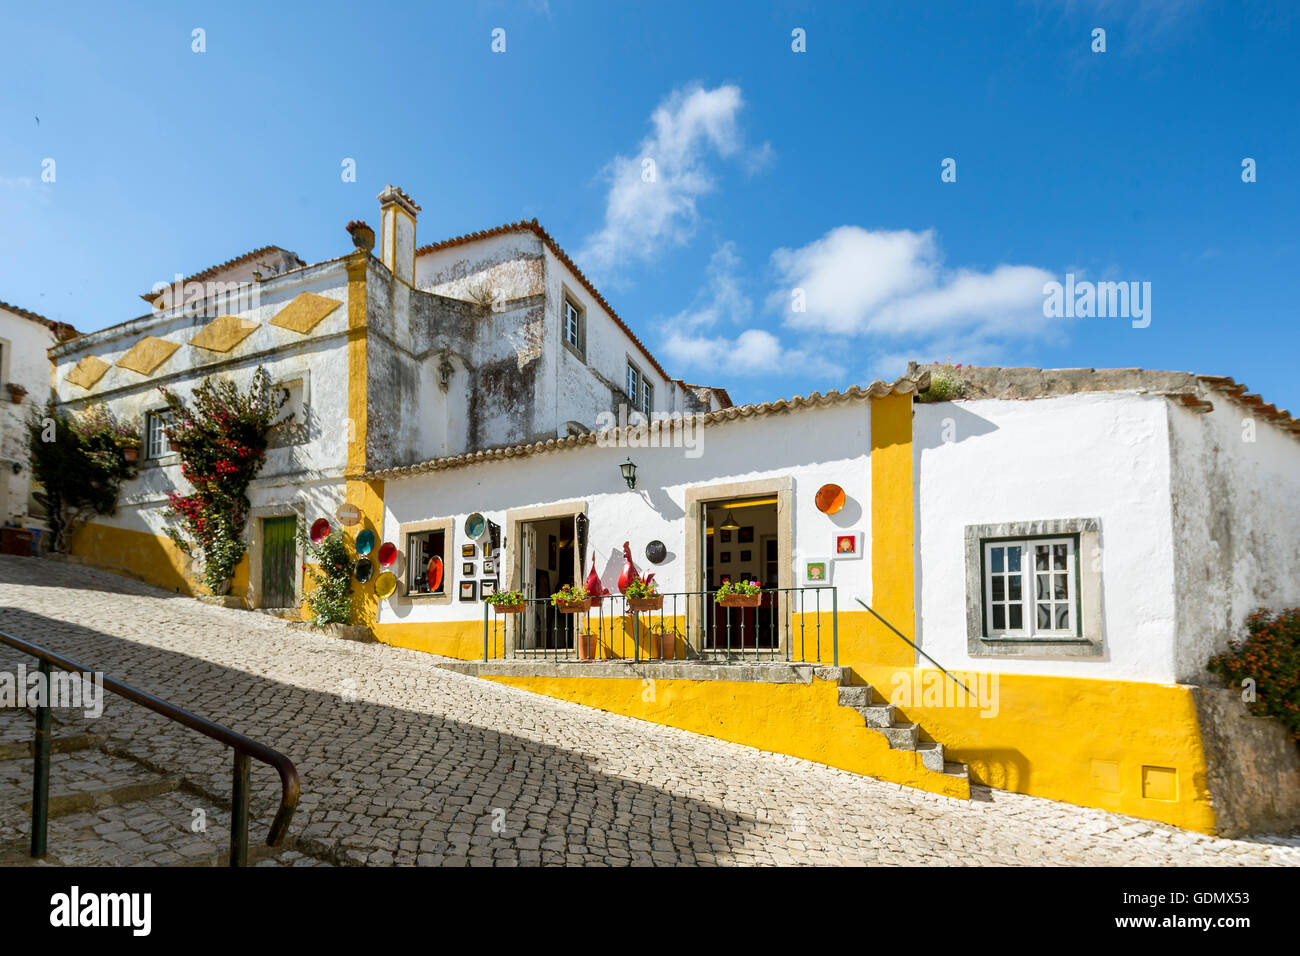 Inside the castle walls are picturesque alleys, picturesque small town of Obidos, Obidos, Leiria District, Portugal, Europe, Stock Photo